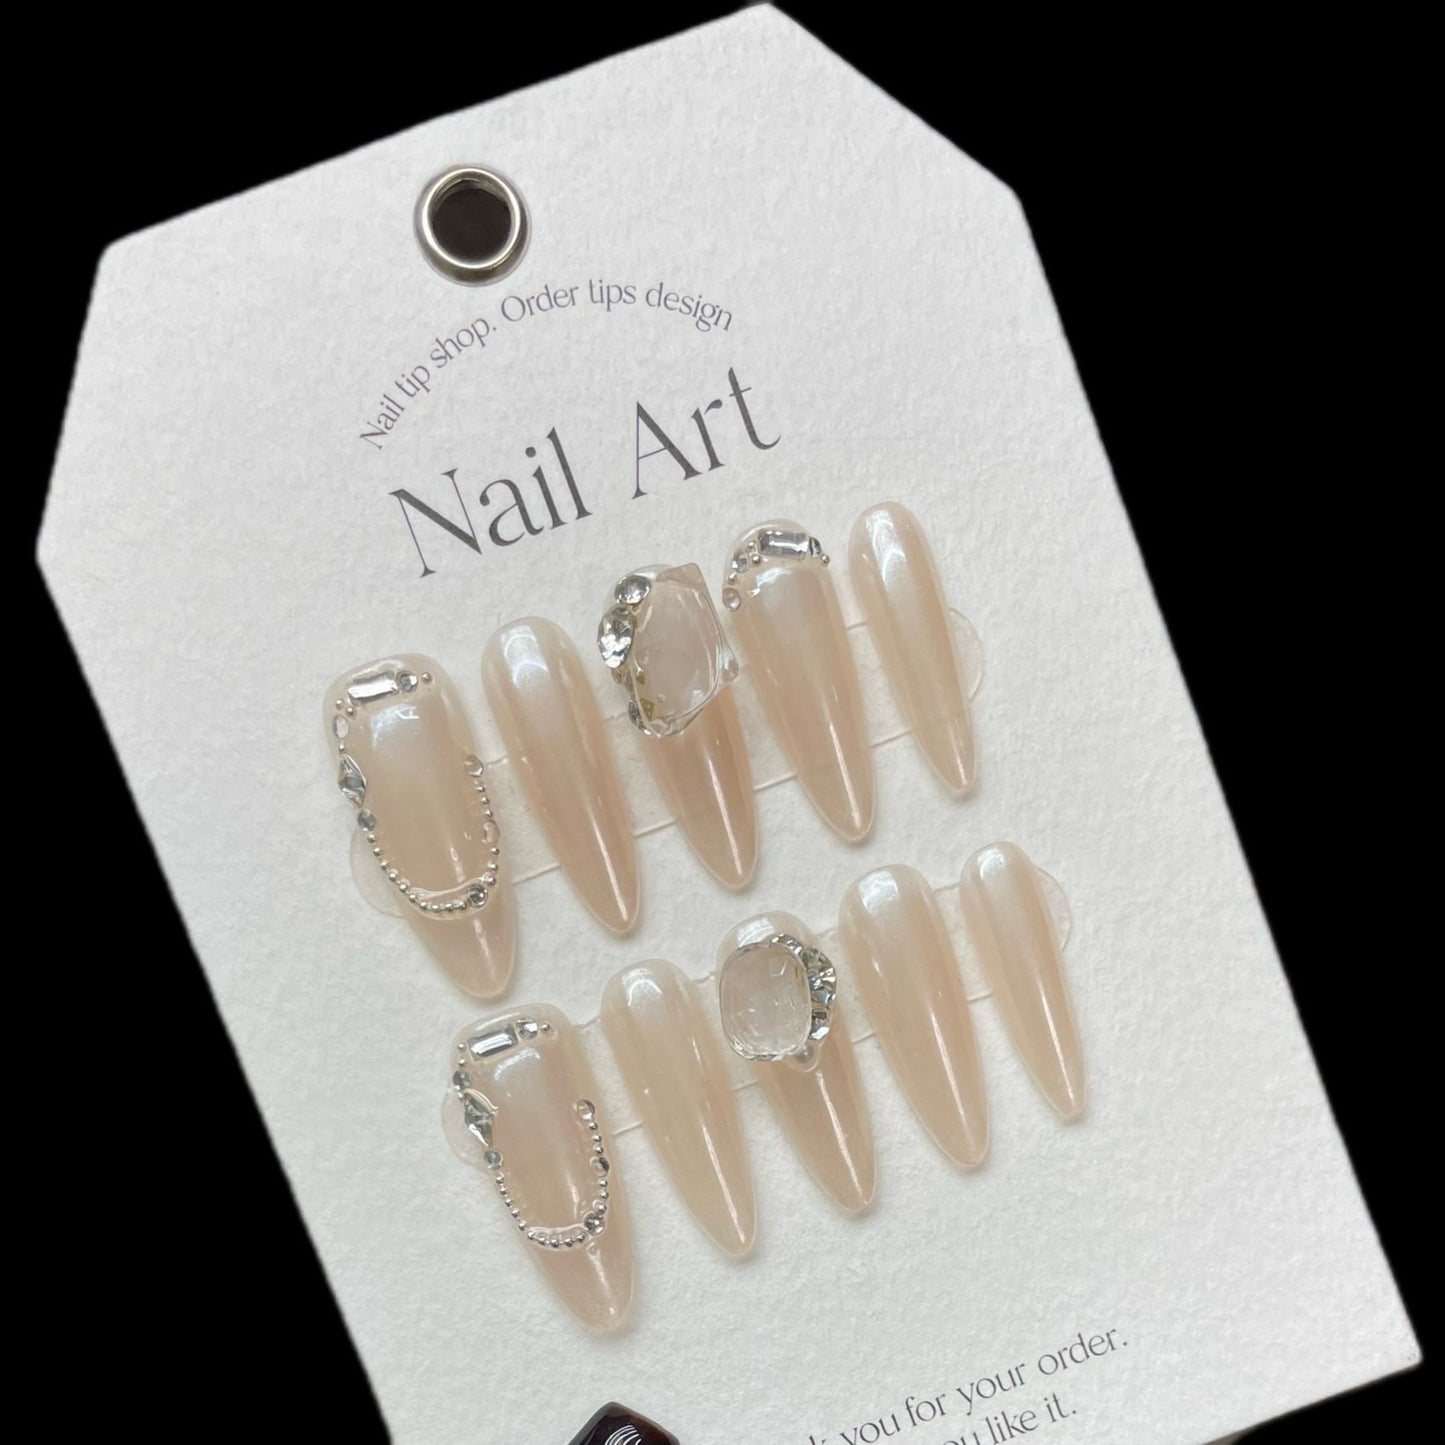 1063 first love style press on nails 100% handmade false nails sliver nude color